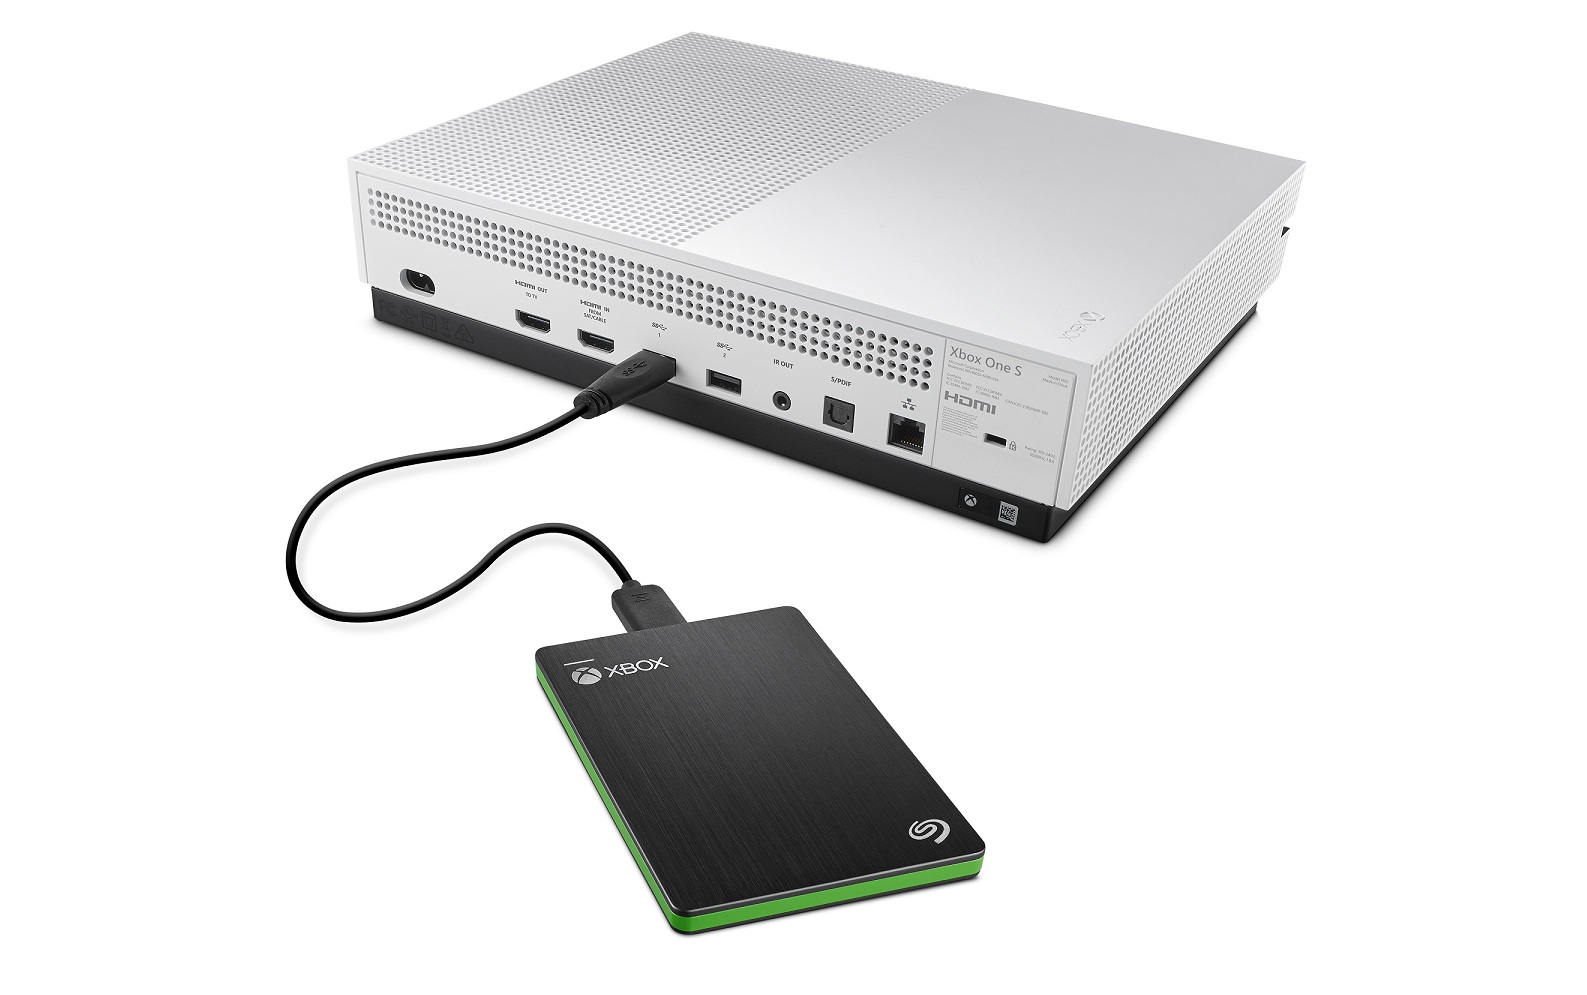 Seagate Announces 512GB Game Drive SSD for Xbox One, Expected to be Available Next Month